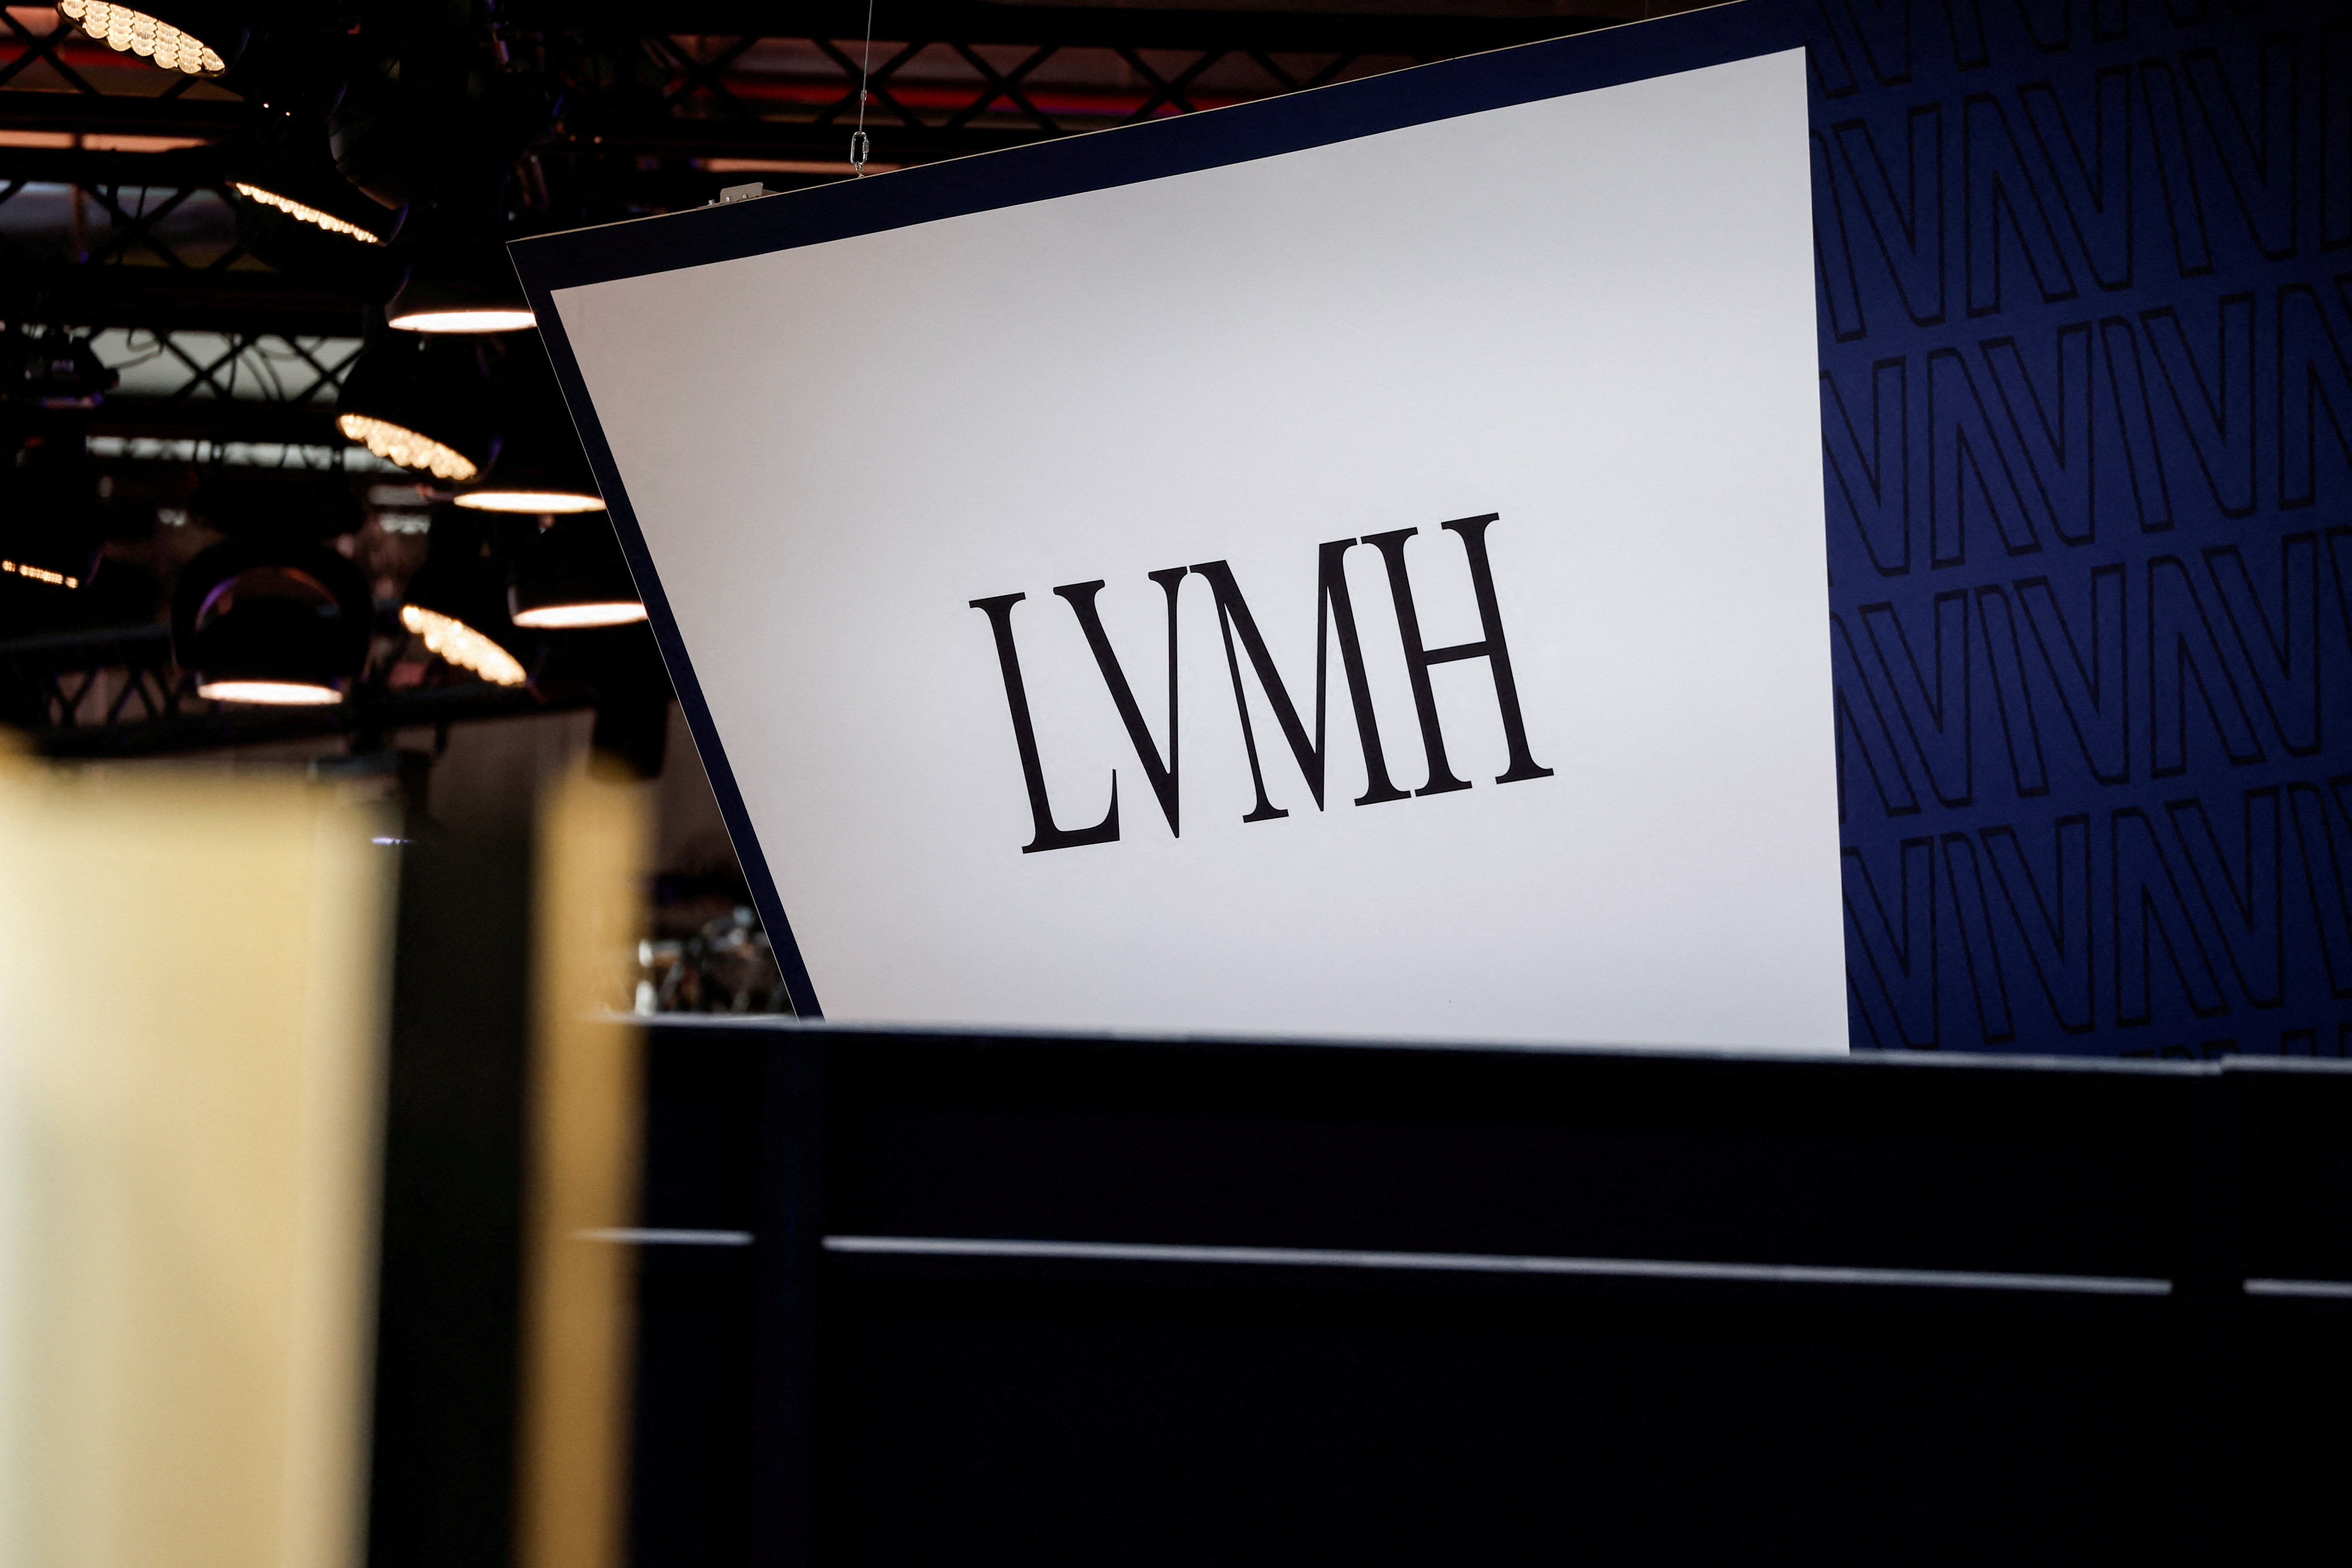 LVMH company logo on a website with blurry stock market